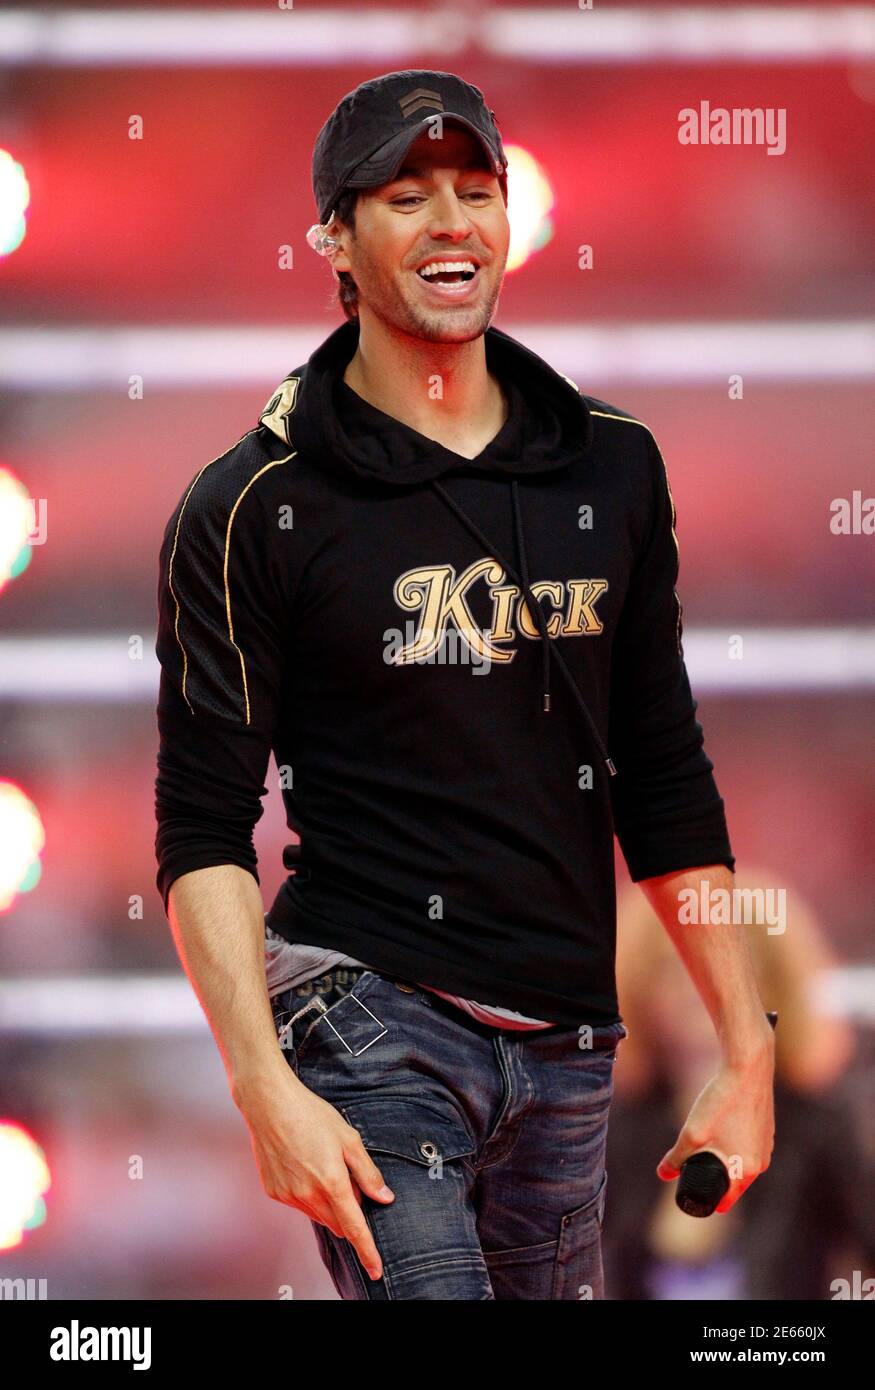 Singer Enrique Iglesias performs at half time of the NFL football game  between the Dallas Cowboys and Miami Dolphins in Arlington, Texas November  24, 2011. REUTERS/Mike Stone (UNITED STATES - Tags: SPORT